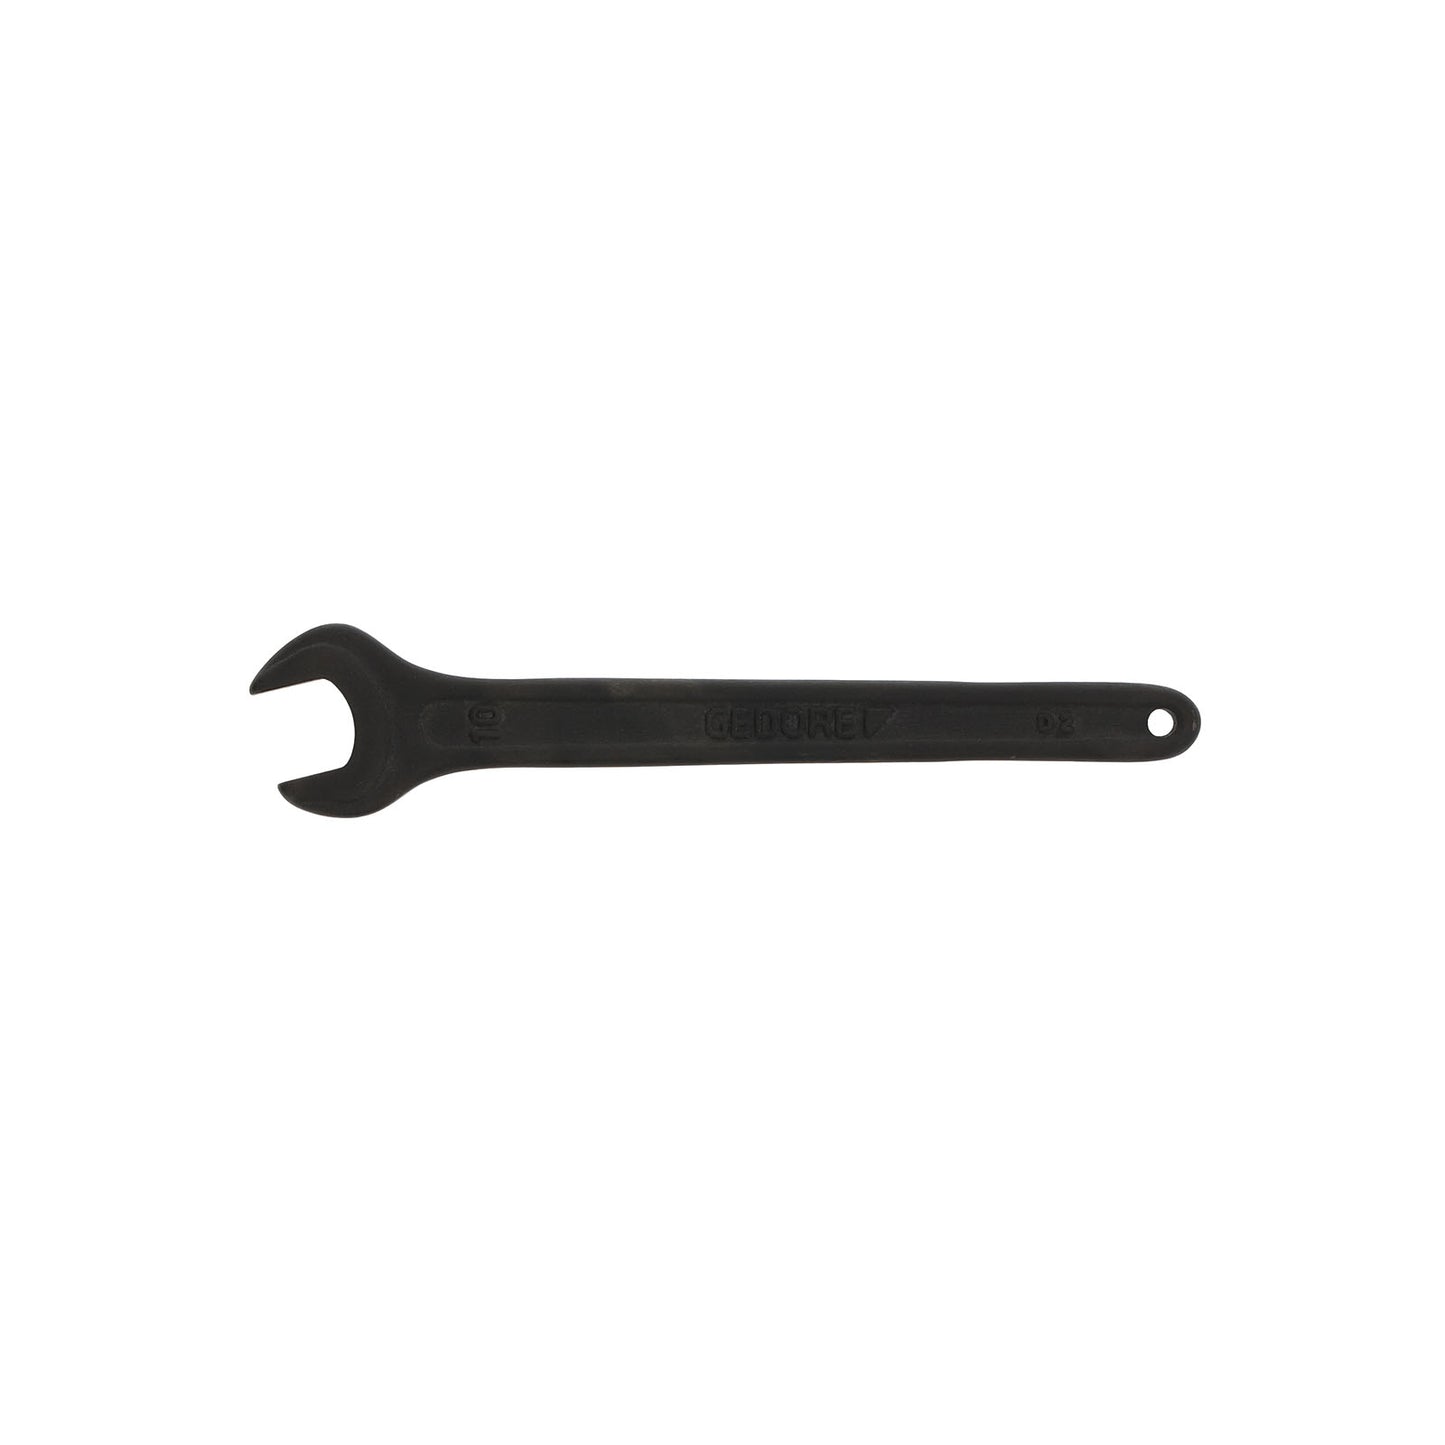 GEDORE 894 10 - 1 Open End Wrench, 10mm (6574090)